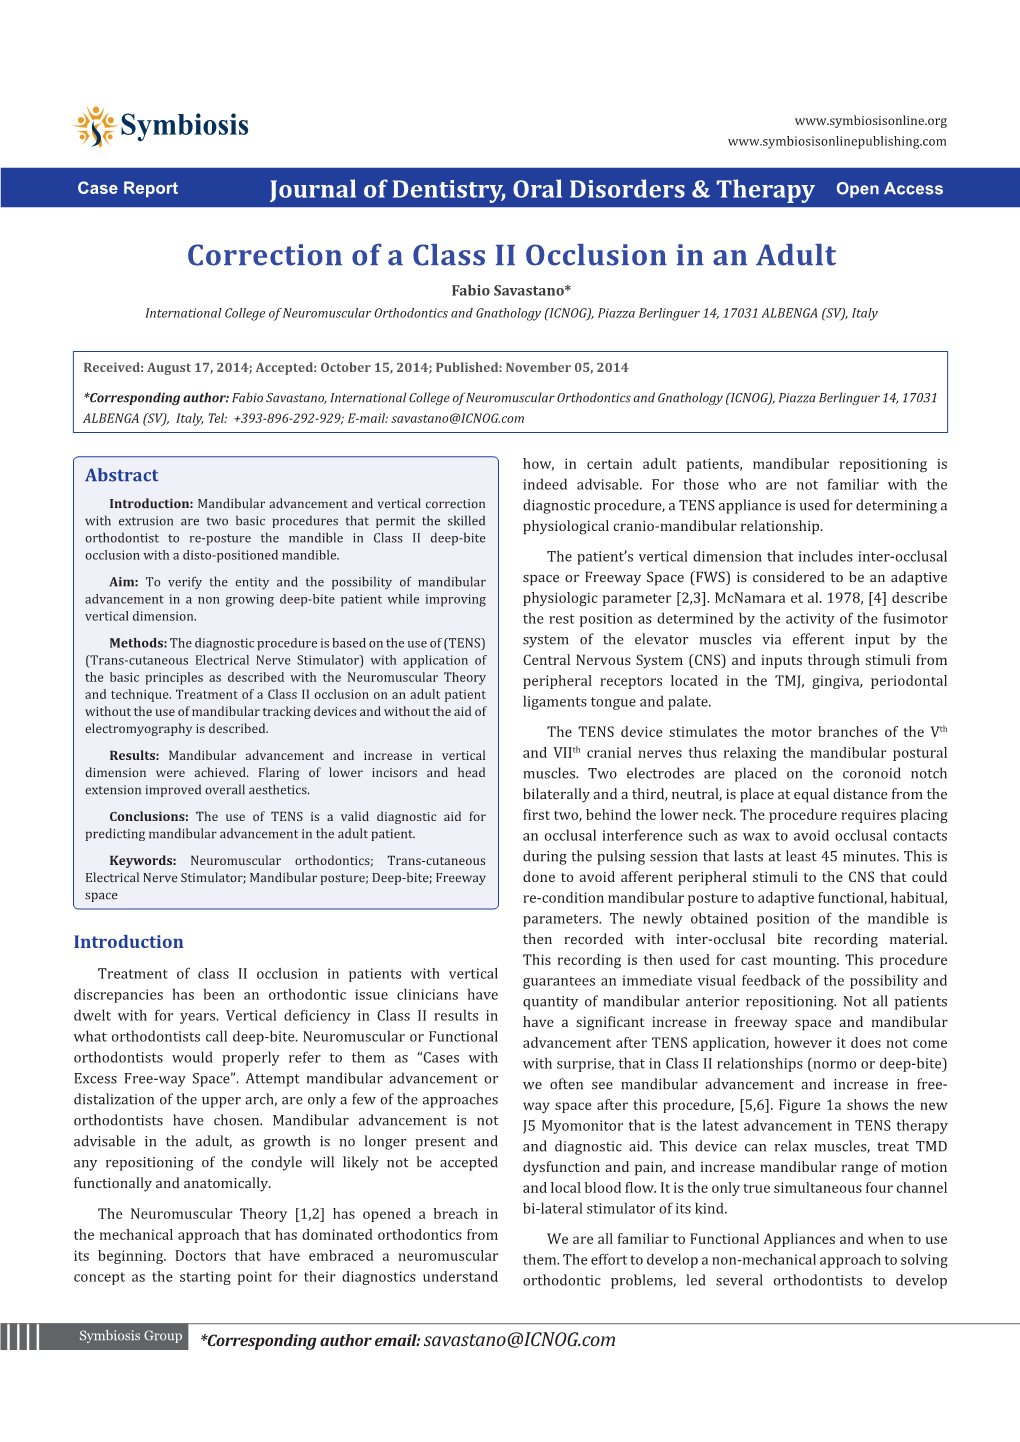 Correction of a Class II Occlusion in an Adult